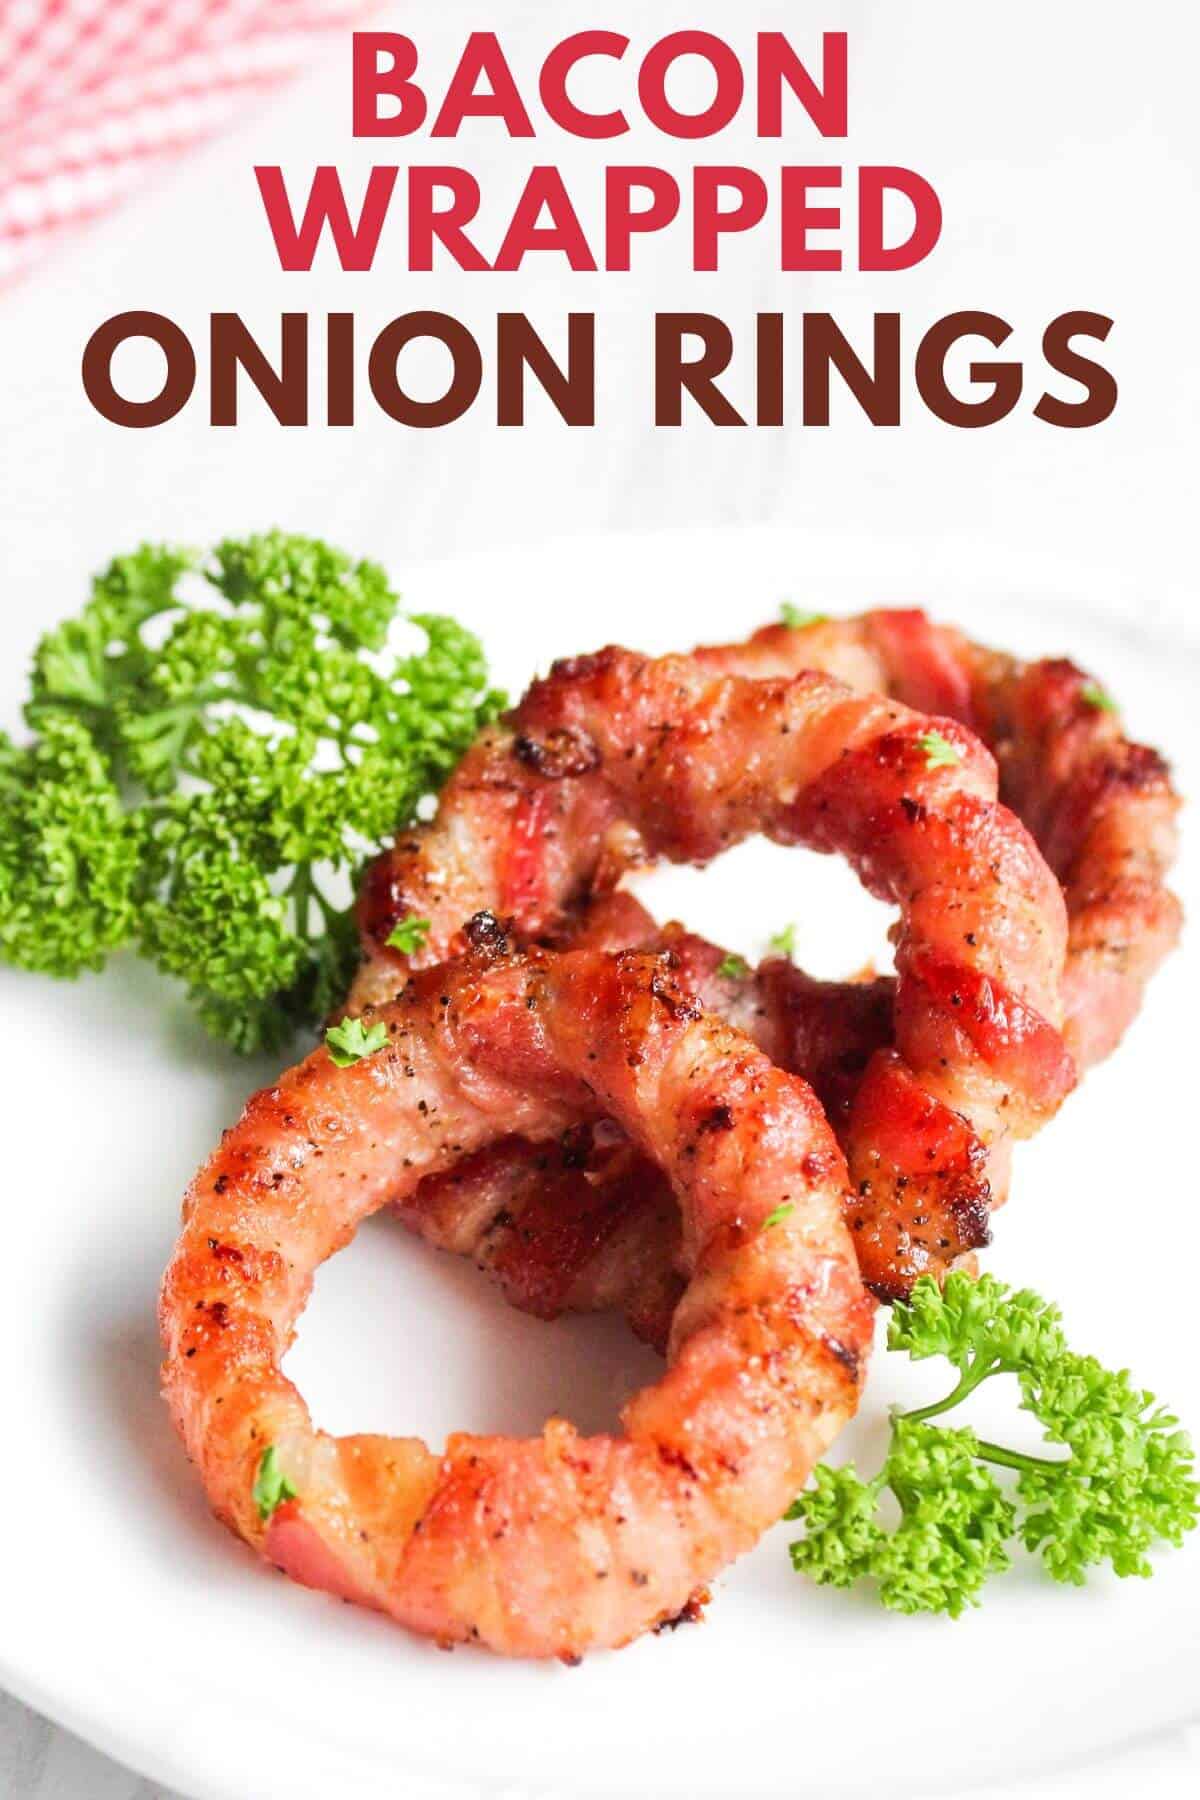 Bacon wrapped onion rings with text.